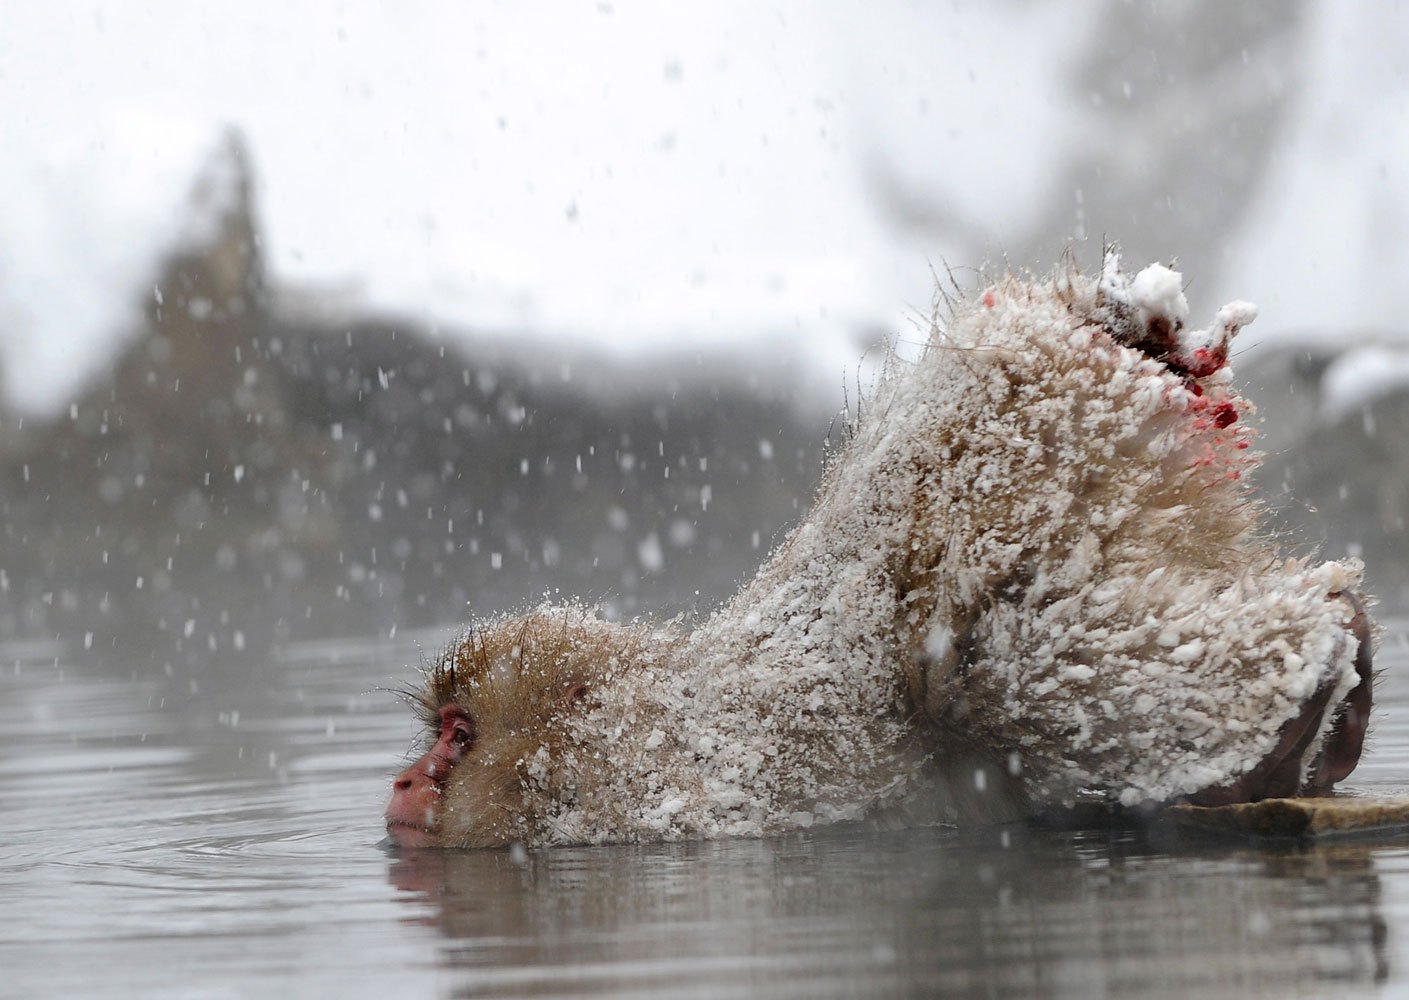 A Japanese macaque monkey, known as a "snow monkey," takes an open-air hot spring bath while snowflakes fall at the Jigokudani Monkey Park in the town of Yamanouchi, Nagano prefecture on Jan. 19, 2014.